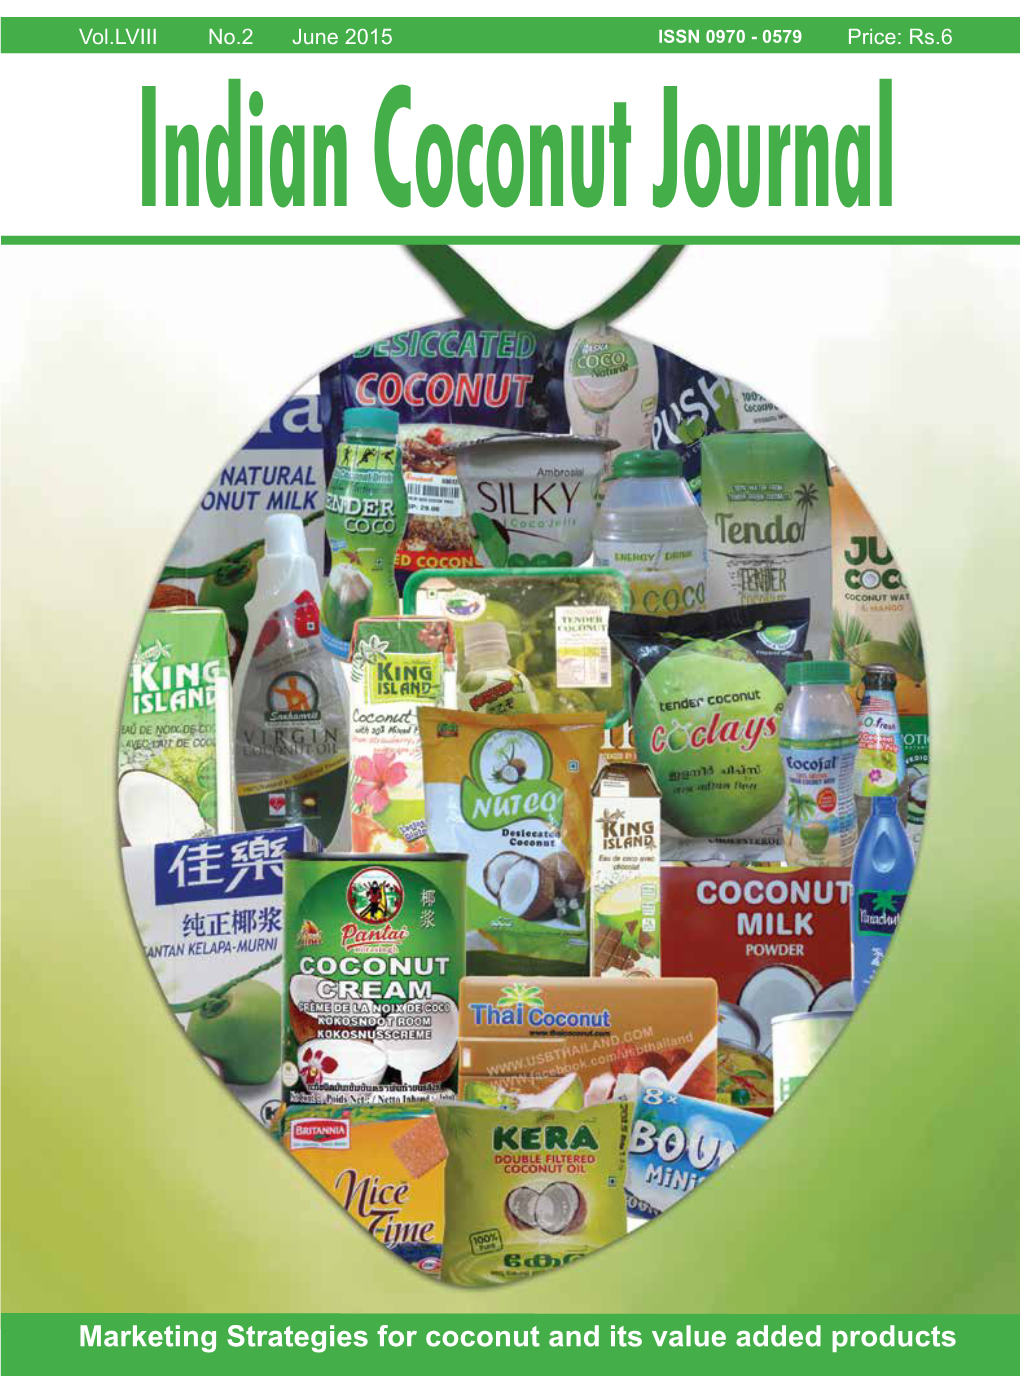 Marketing Strategies for Coconut and Its Value Added Products